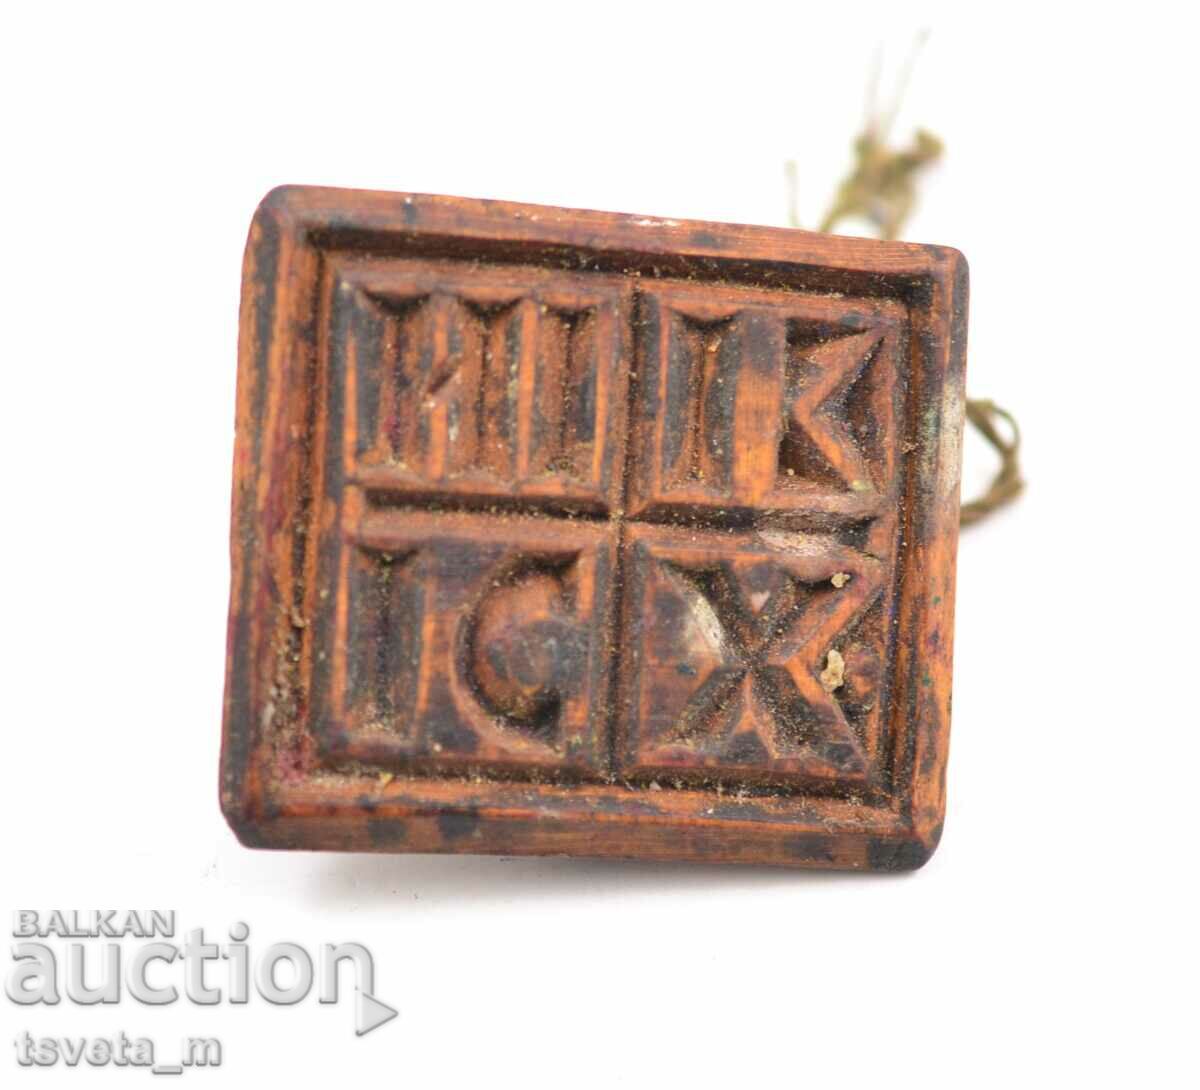 Prosfornik, a wooden bread stamp with Christian symbolism